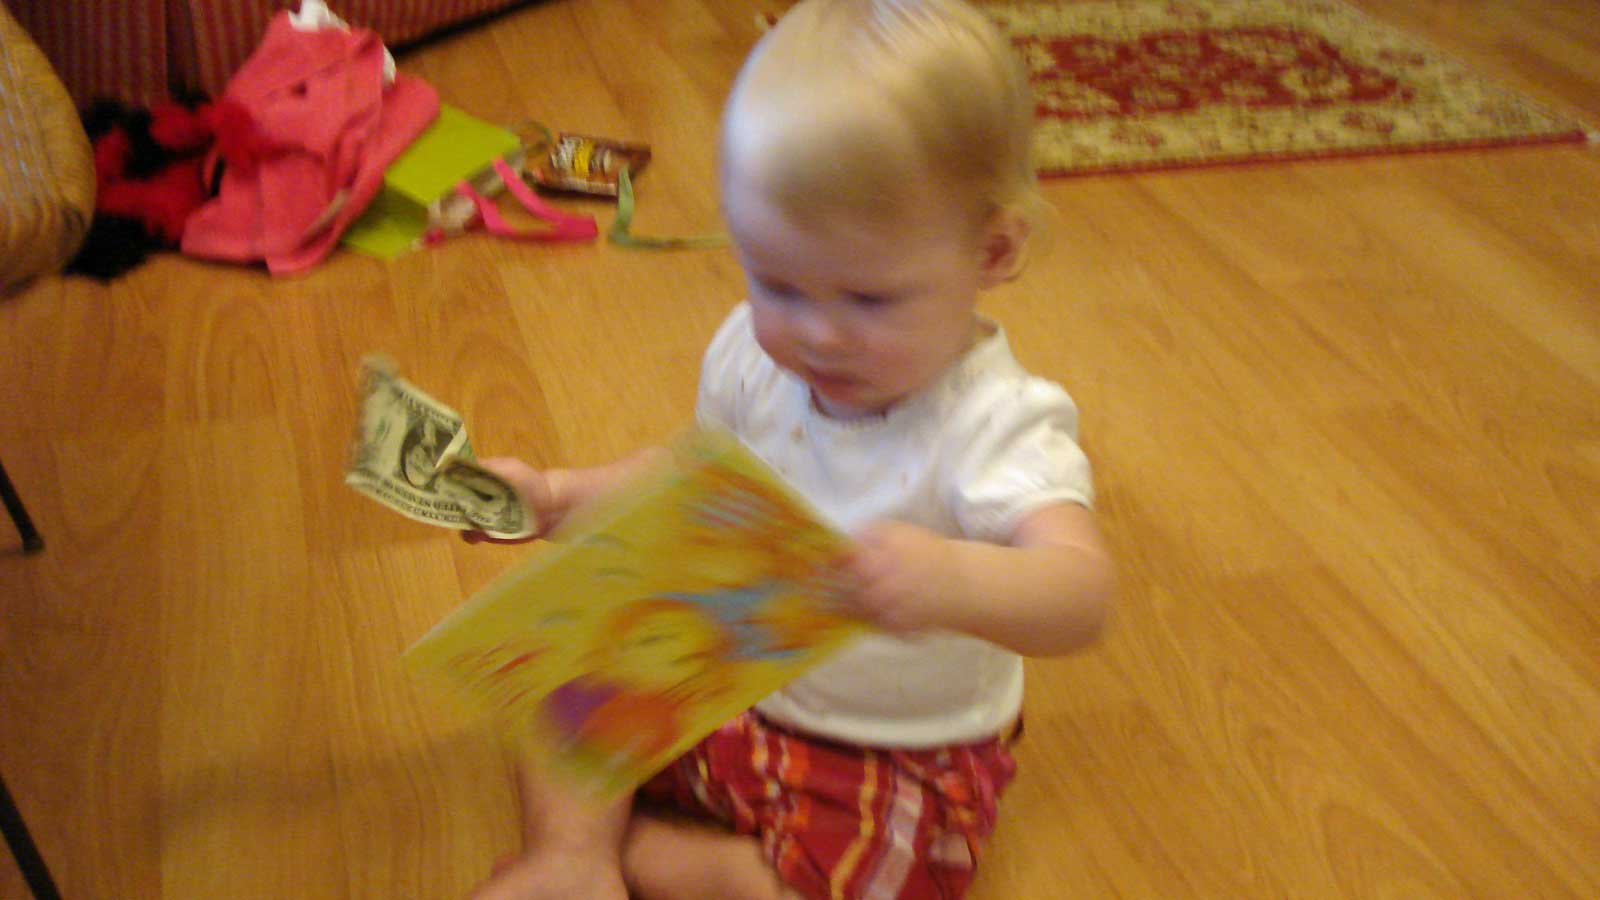 Emily with a birthday card and a dollar bill